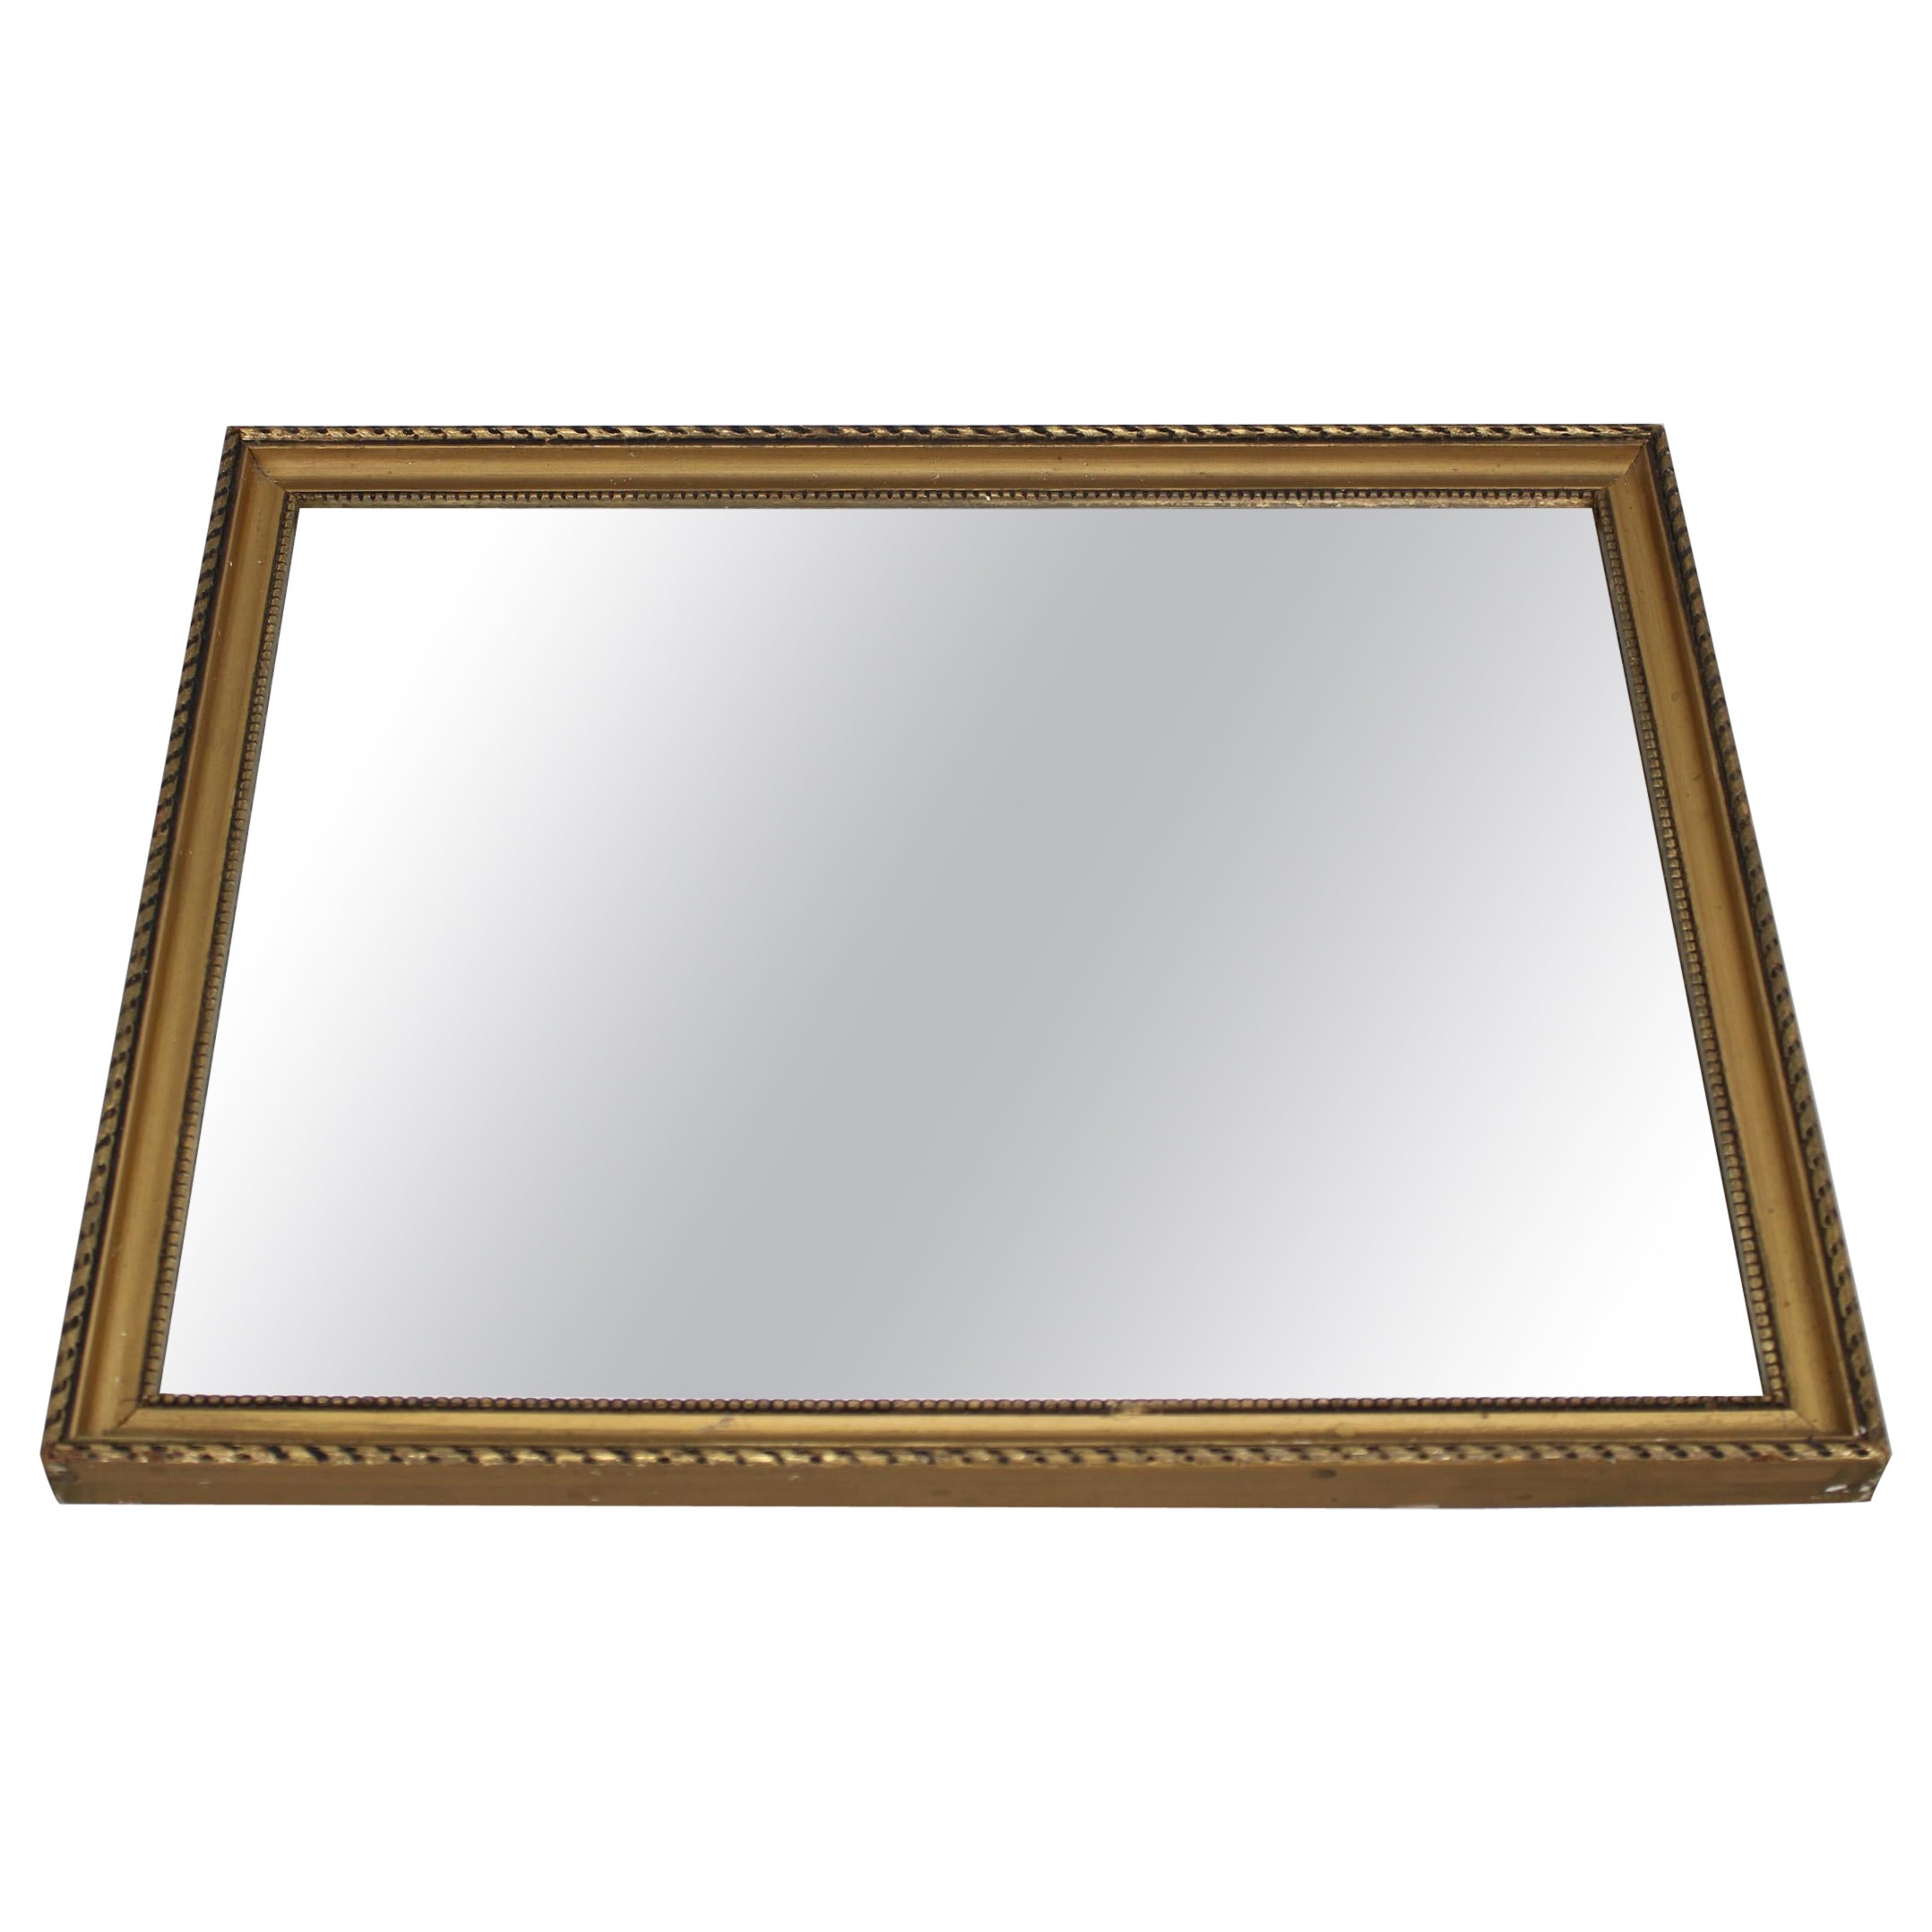 1950s Mirror in Golden Wood Frame For Sale